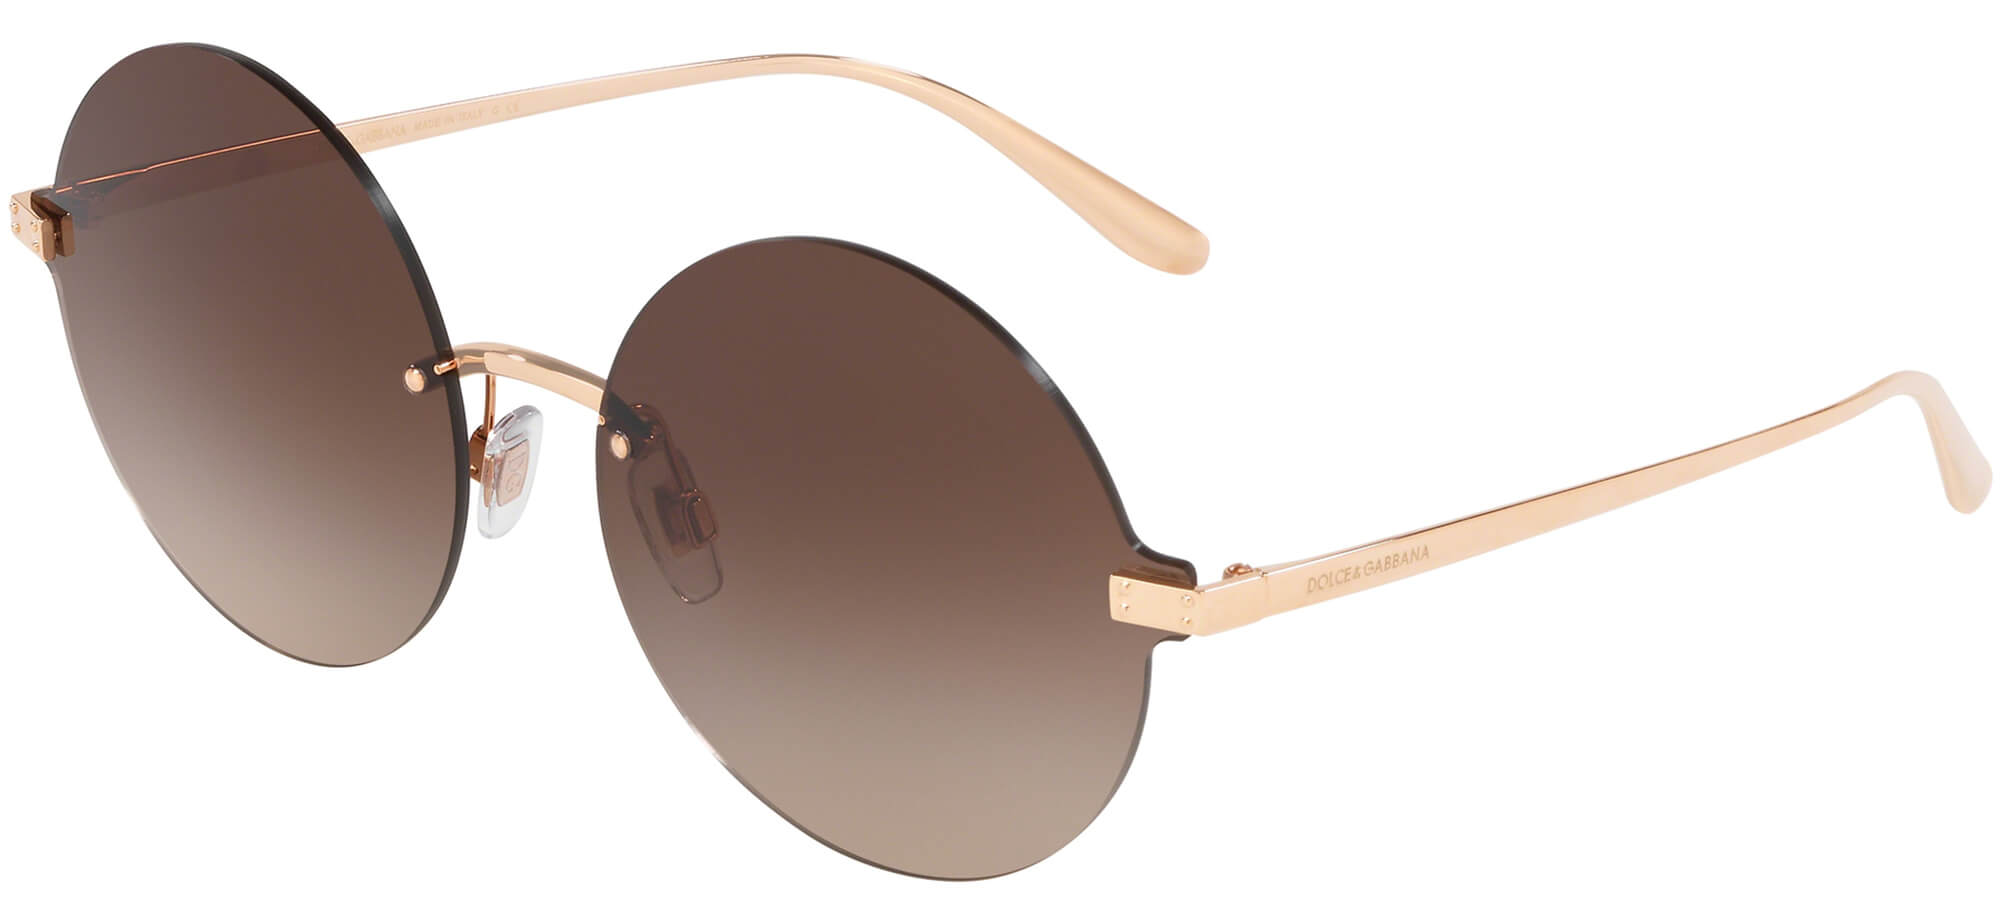 Dolce & GabbanaLOGO PLAQUE DG 2228Rose Gold/brown Shaded (1298/13)